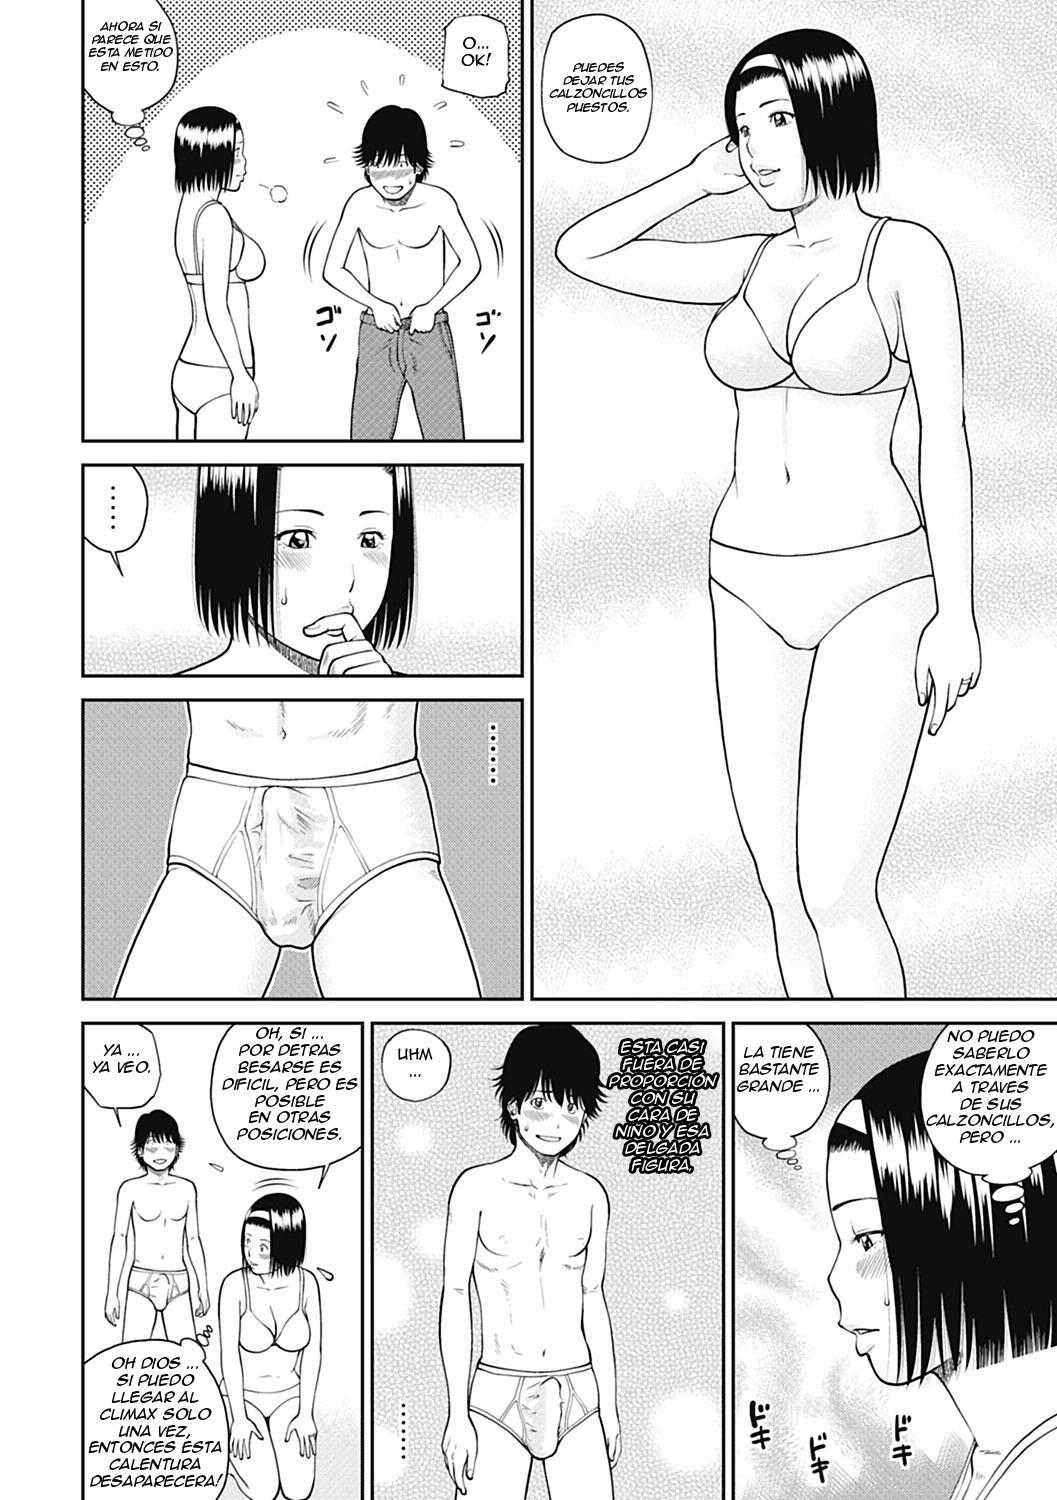 34 Year Old Begging Wife Ch. 1-5 (Sin Censura) Chapter-1 - 15